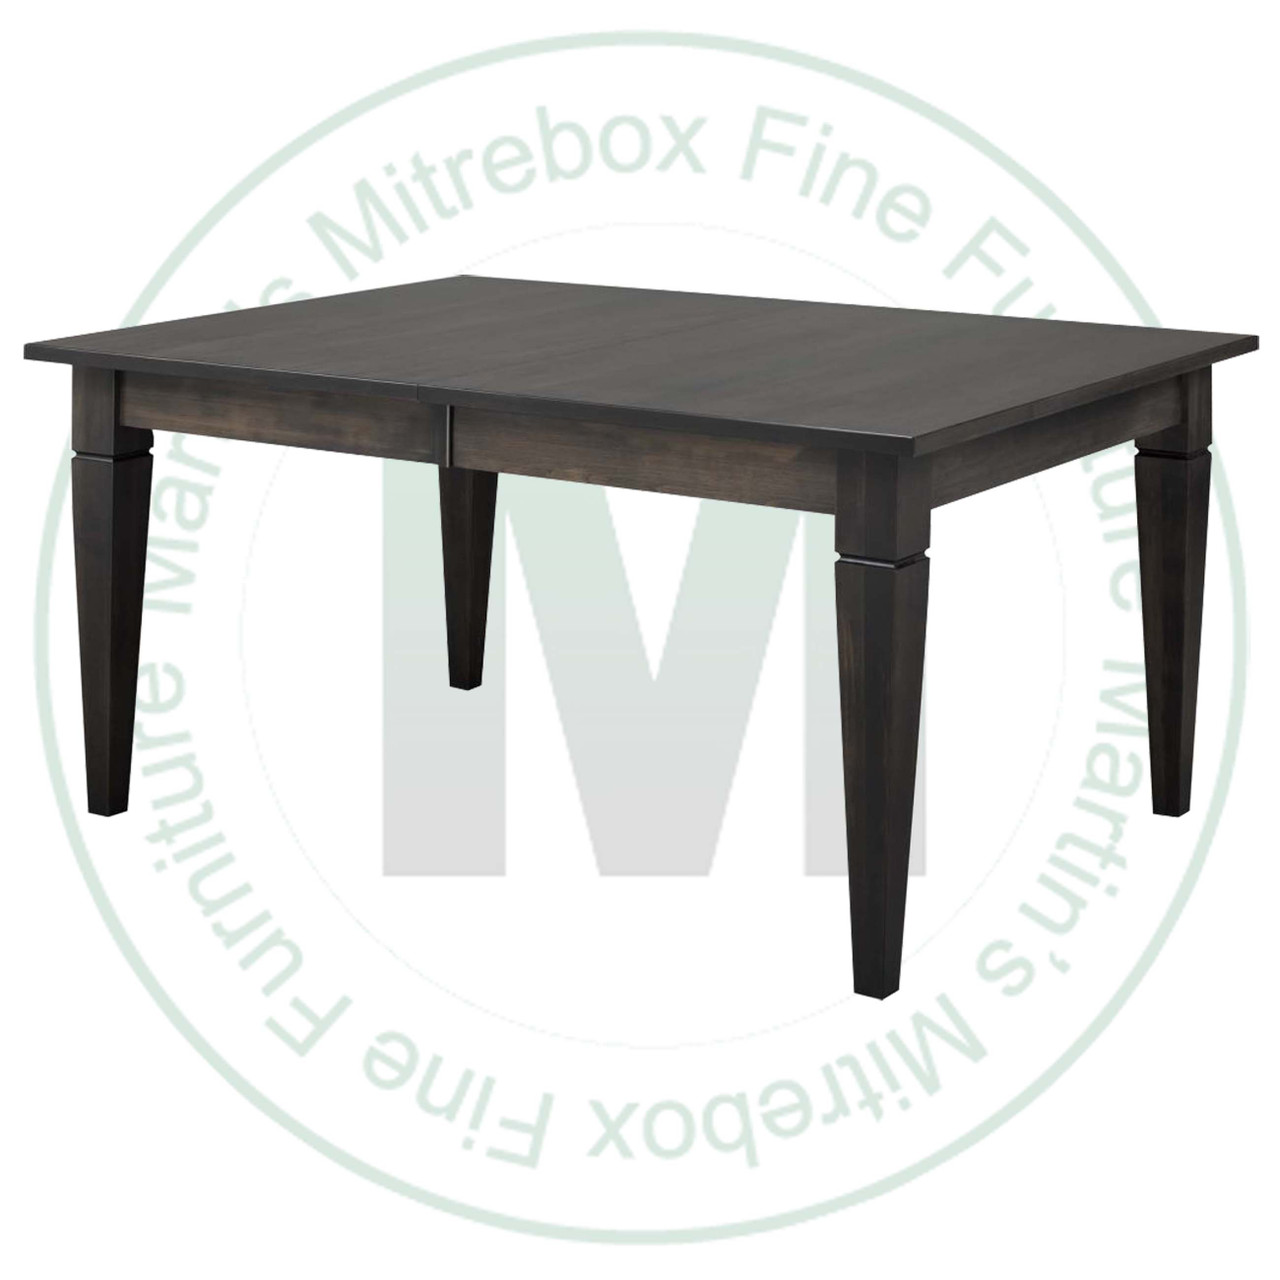 Maple Reesor Extension Harvest Table 48''D x 60''W x 30''H With 2 - 12'' Leaves Table Has 1'' Thick Top